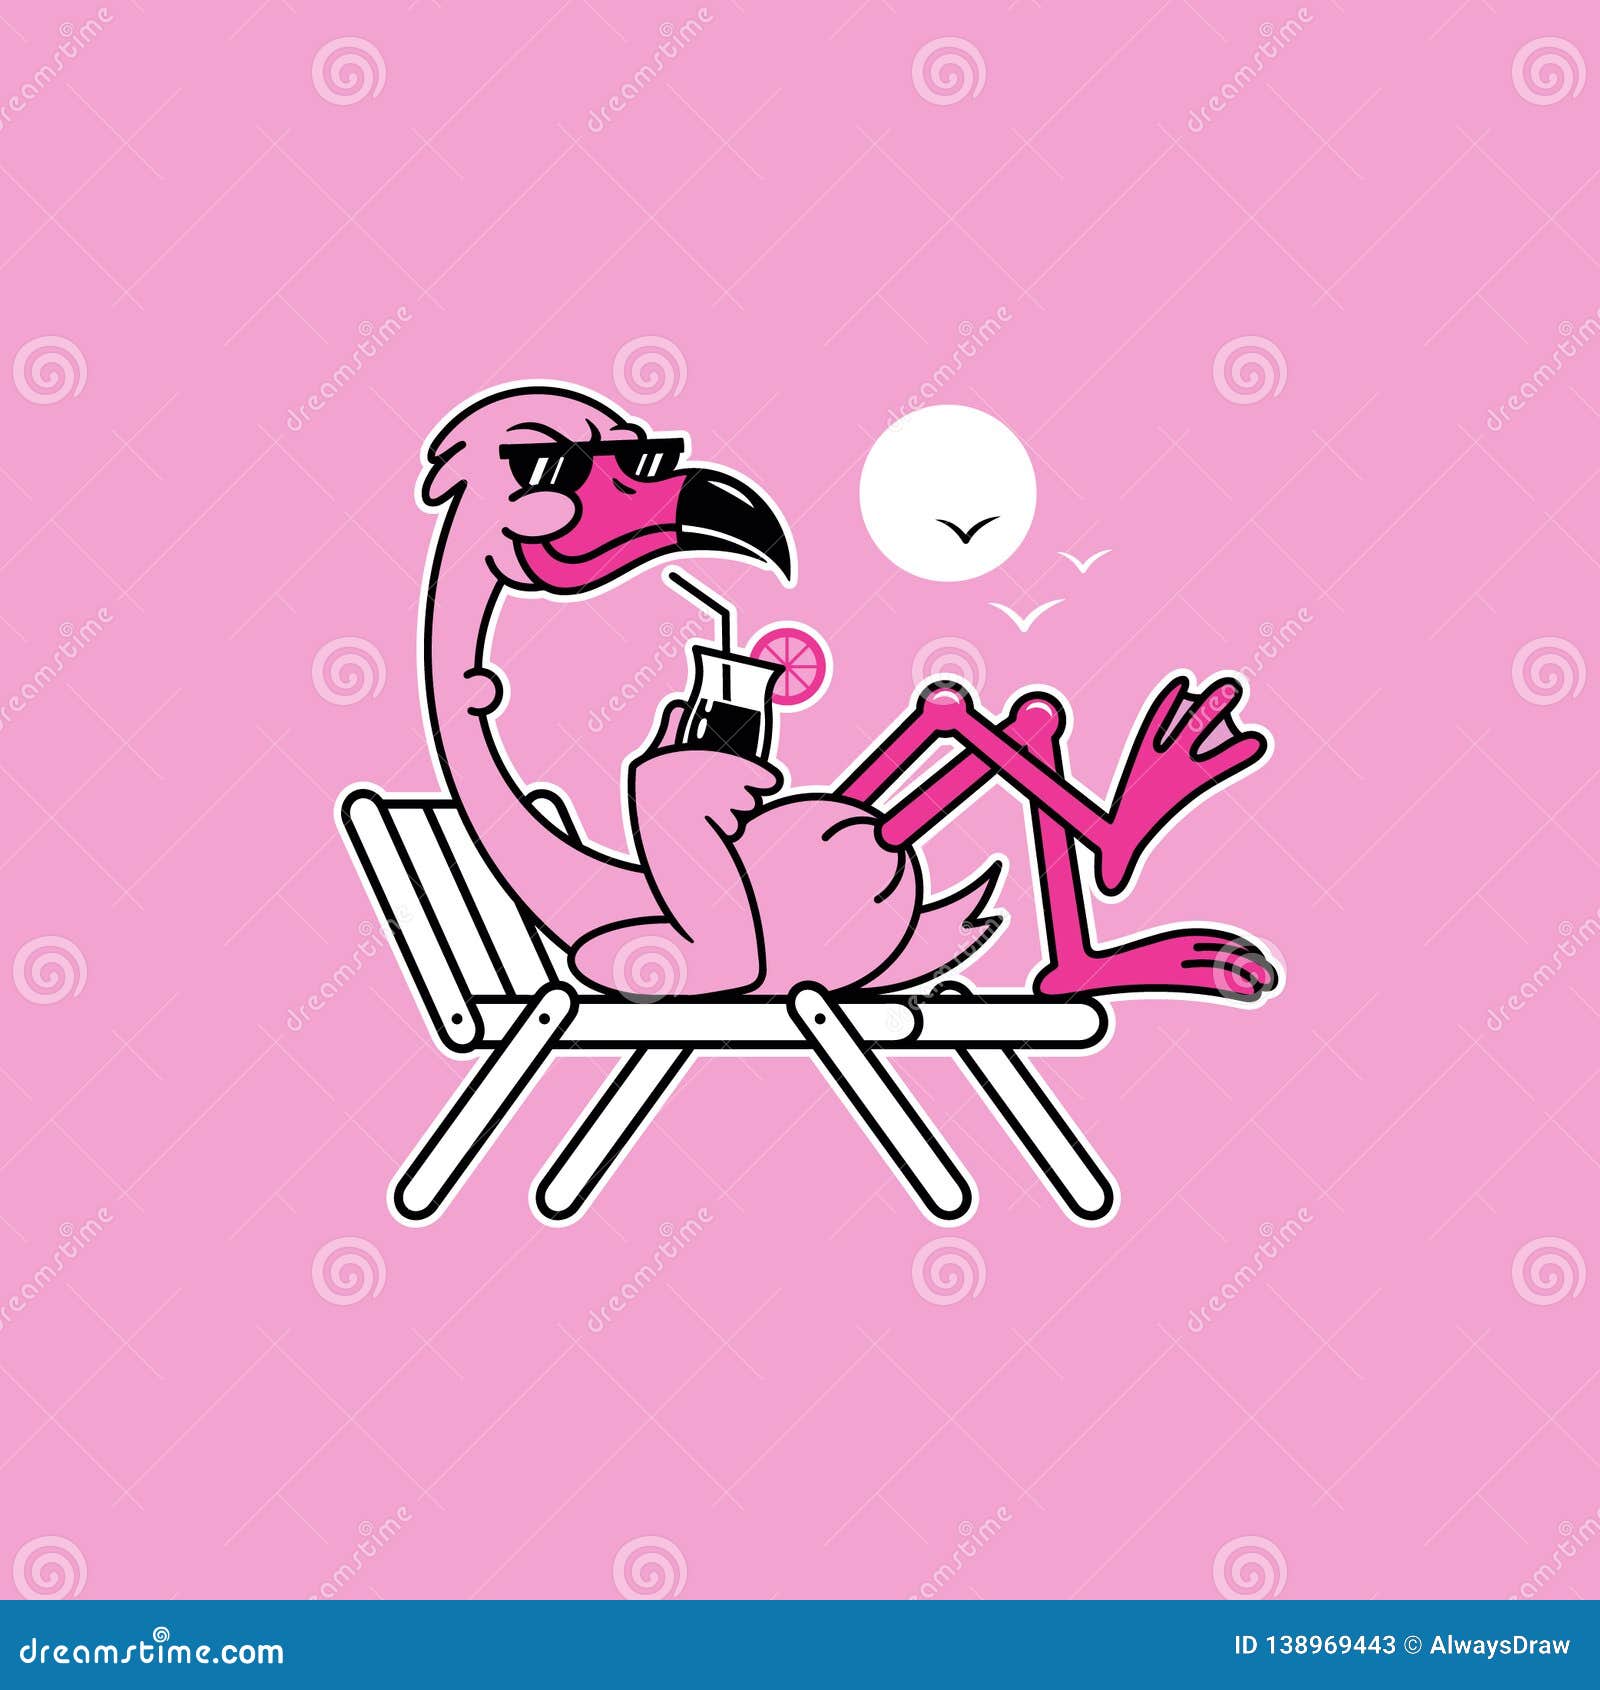 flamingo chilling with cocktail